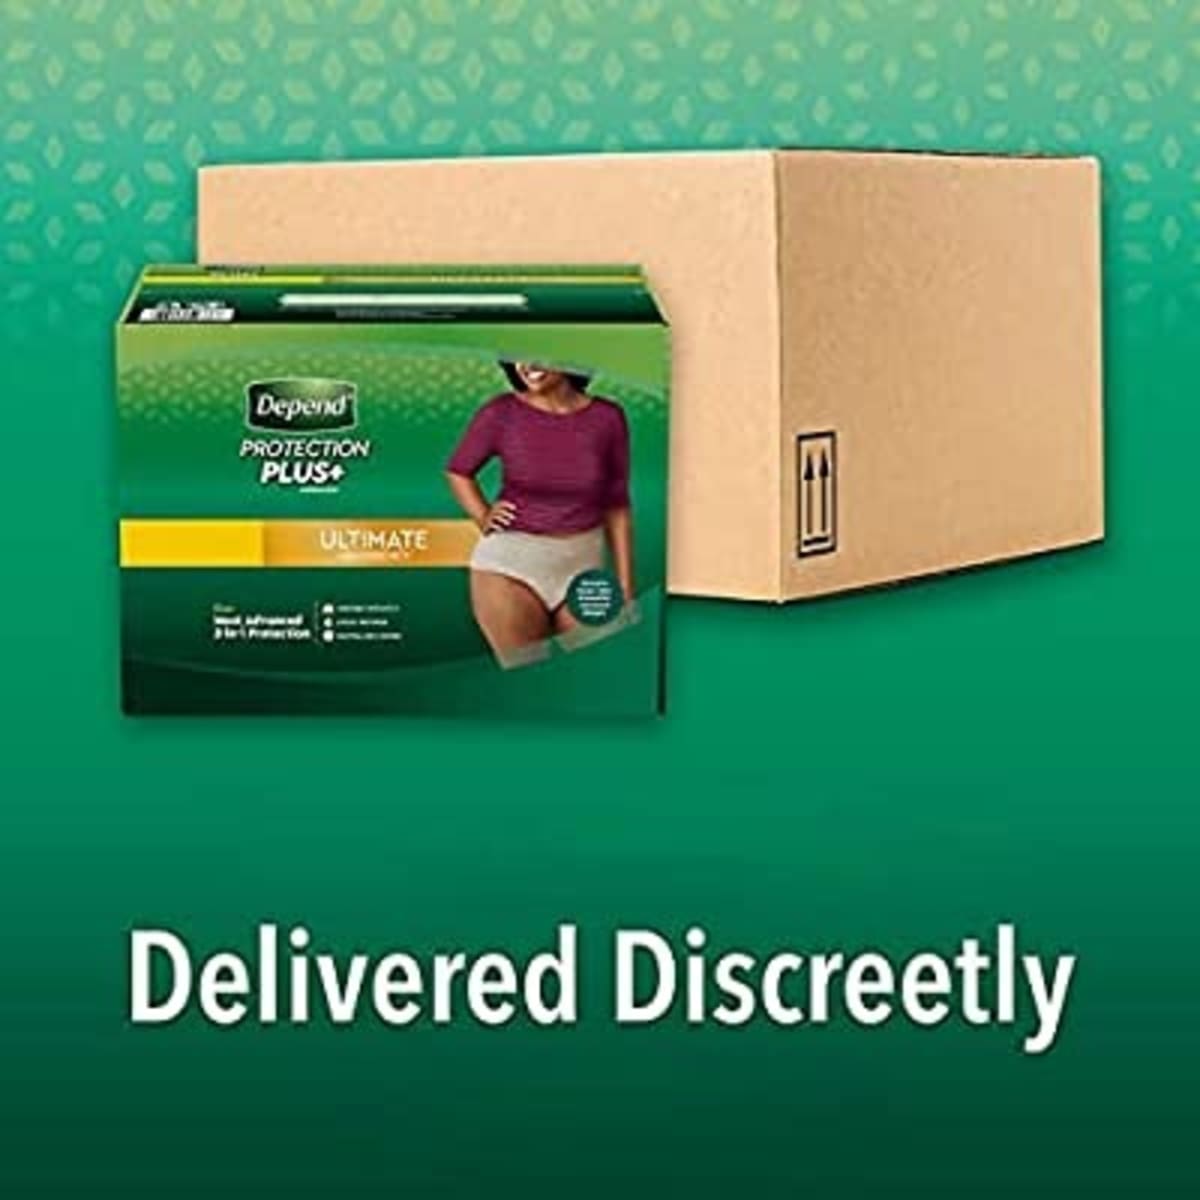 Depend Protection Plus Ultimate Underwear For Men, Large (84 Count